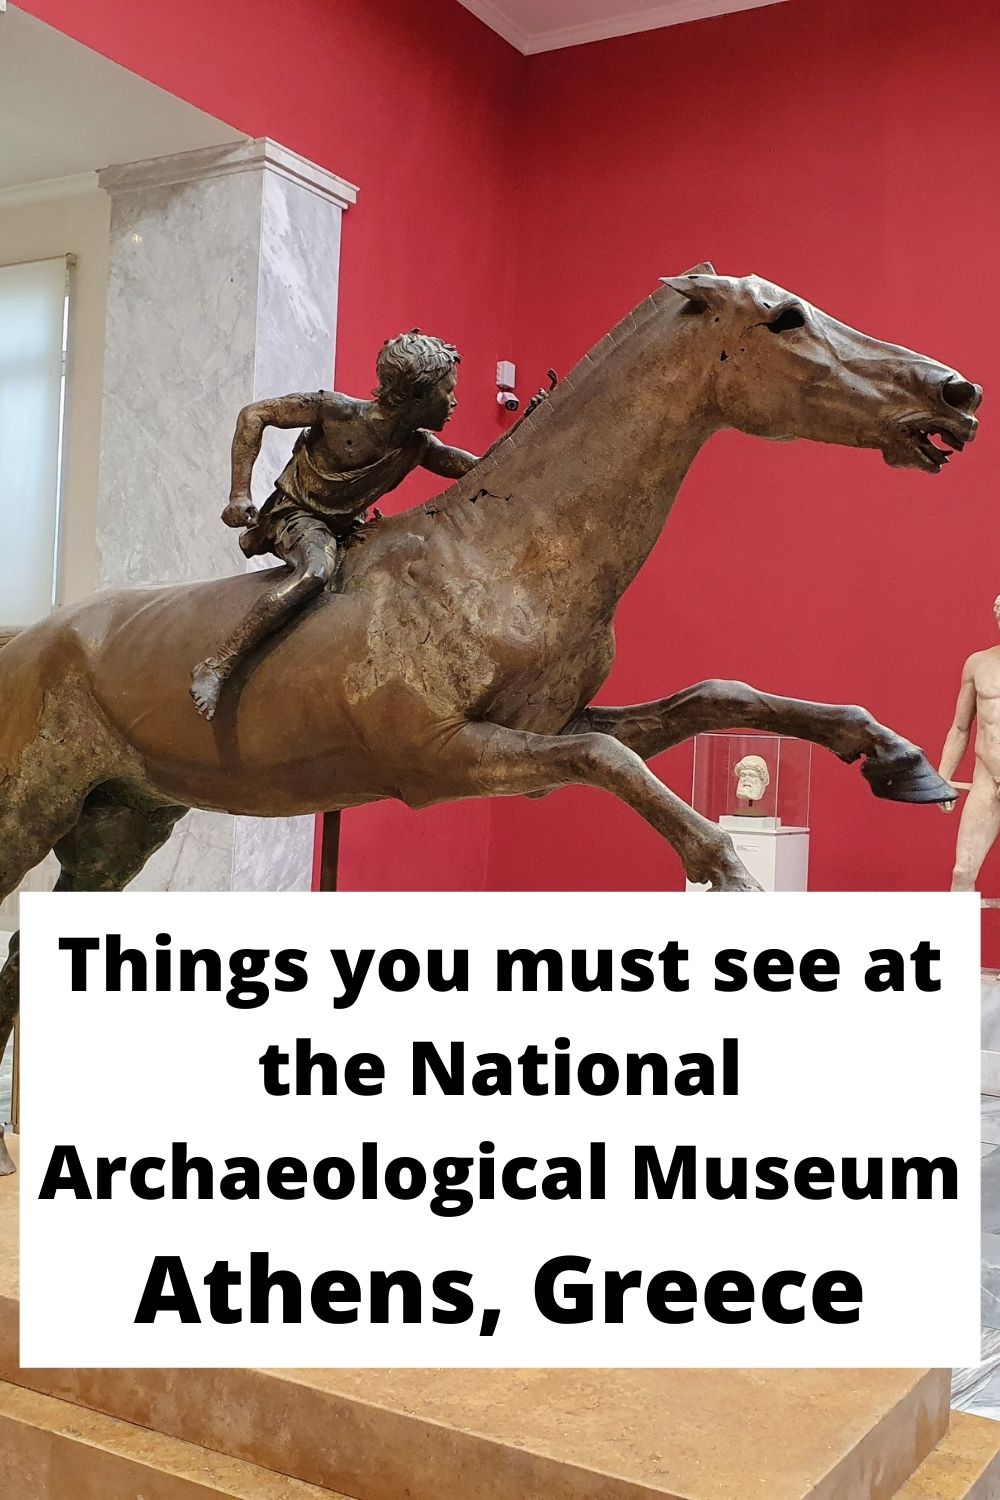 Highlights of the National Archaeological Museum in Athens, Greece